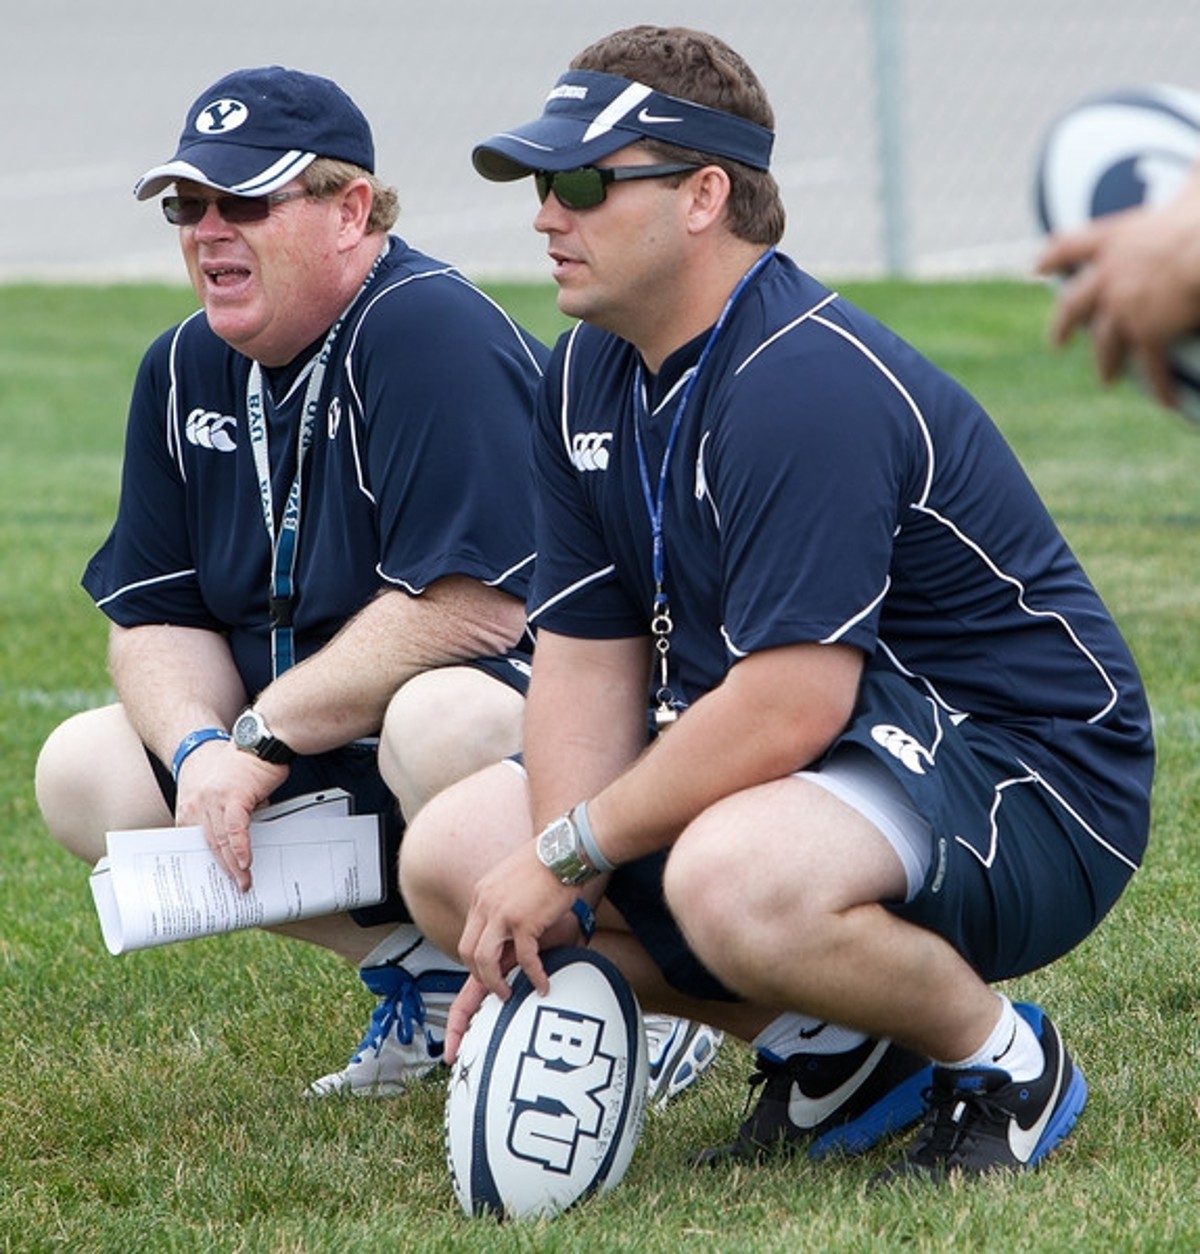 Former BYU rugby coaches to take roles with the UVU rugby program